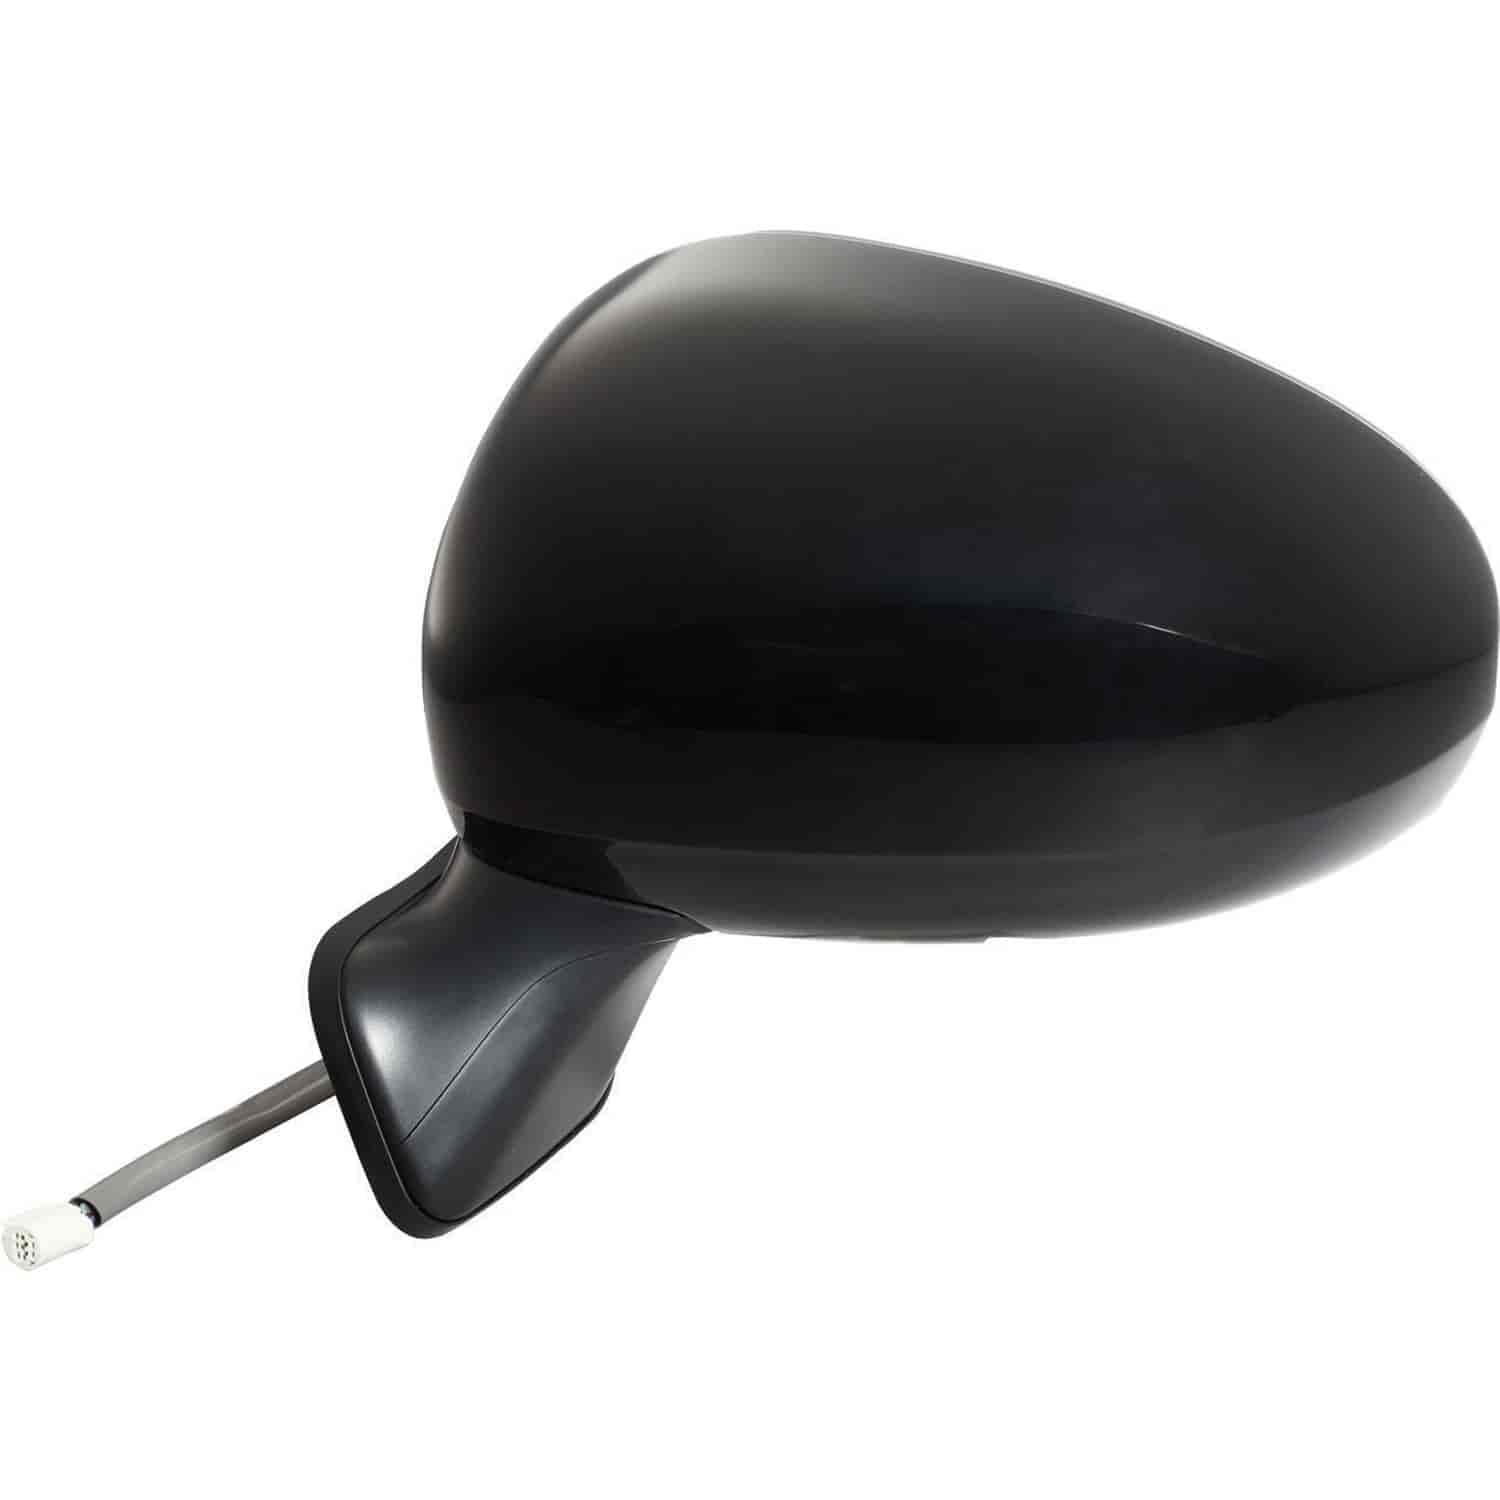 OEM Style Replacement mirror for 10-14 Toyota Prius Prius Type L driver side mirror tested to fit an